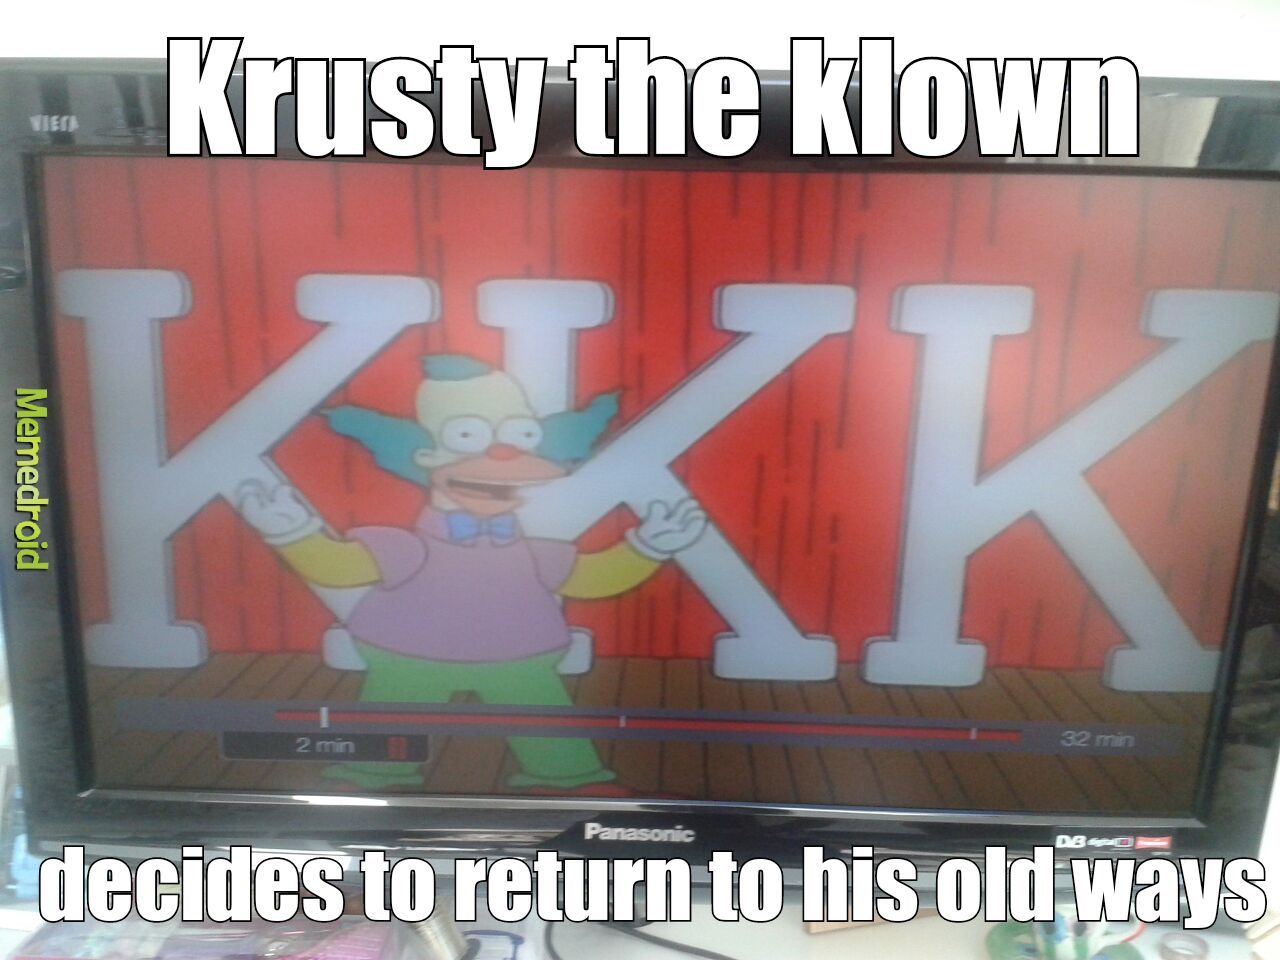 krusty the klown decides to return to his old ways - meme